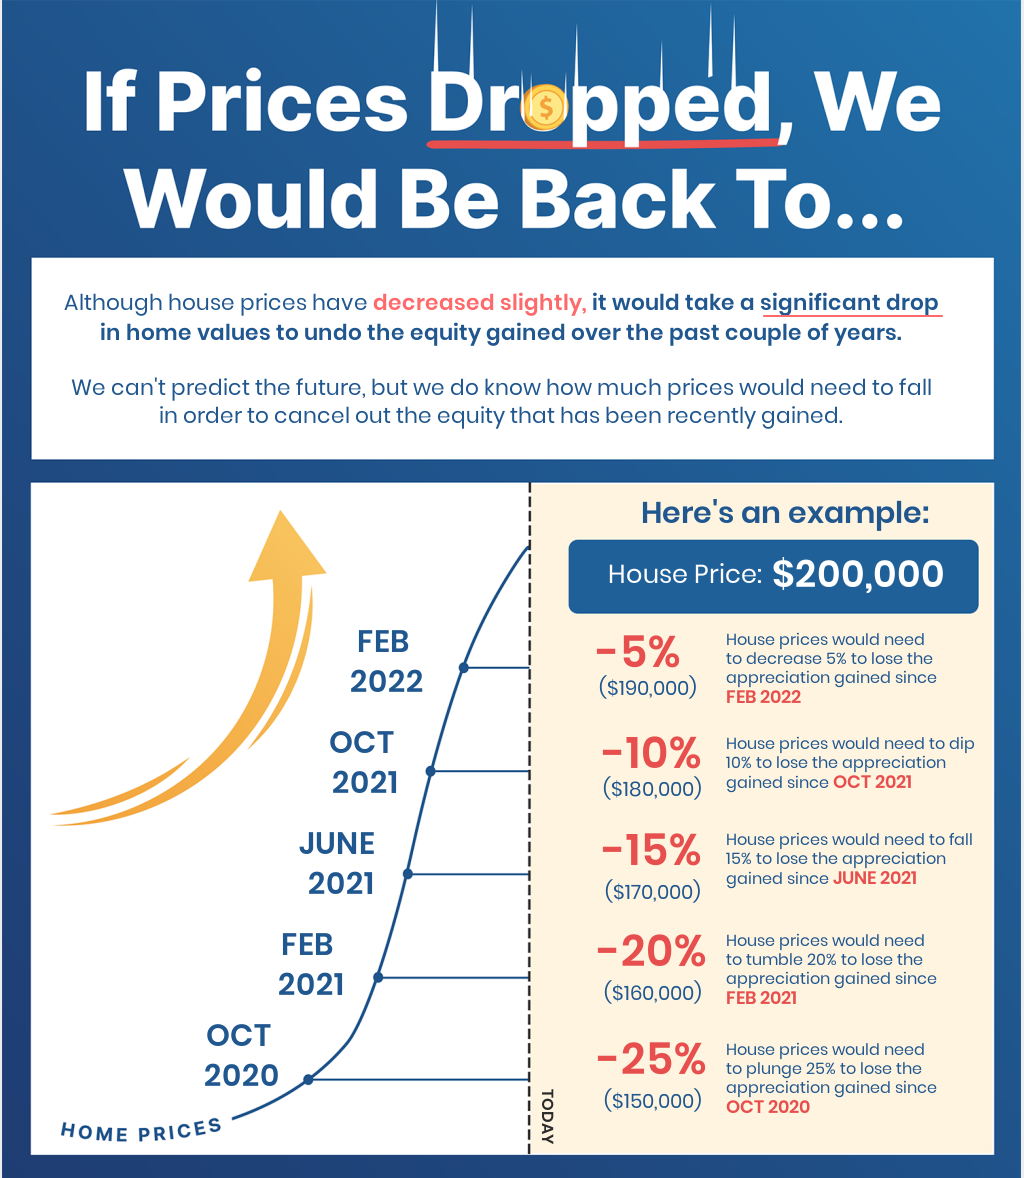 What if home prices dip in the coming months?